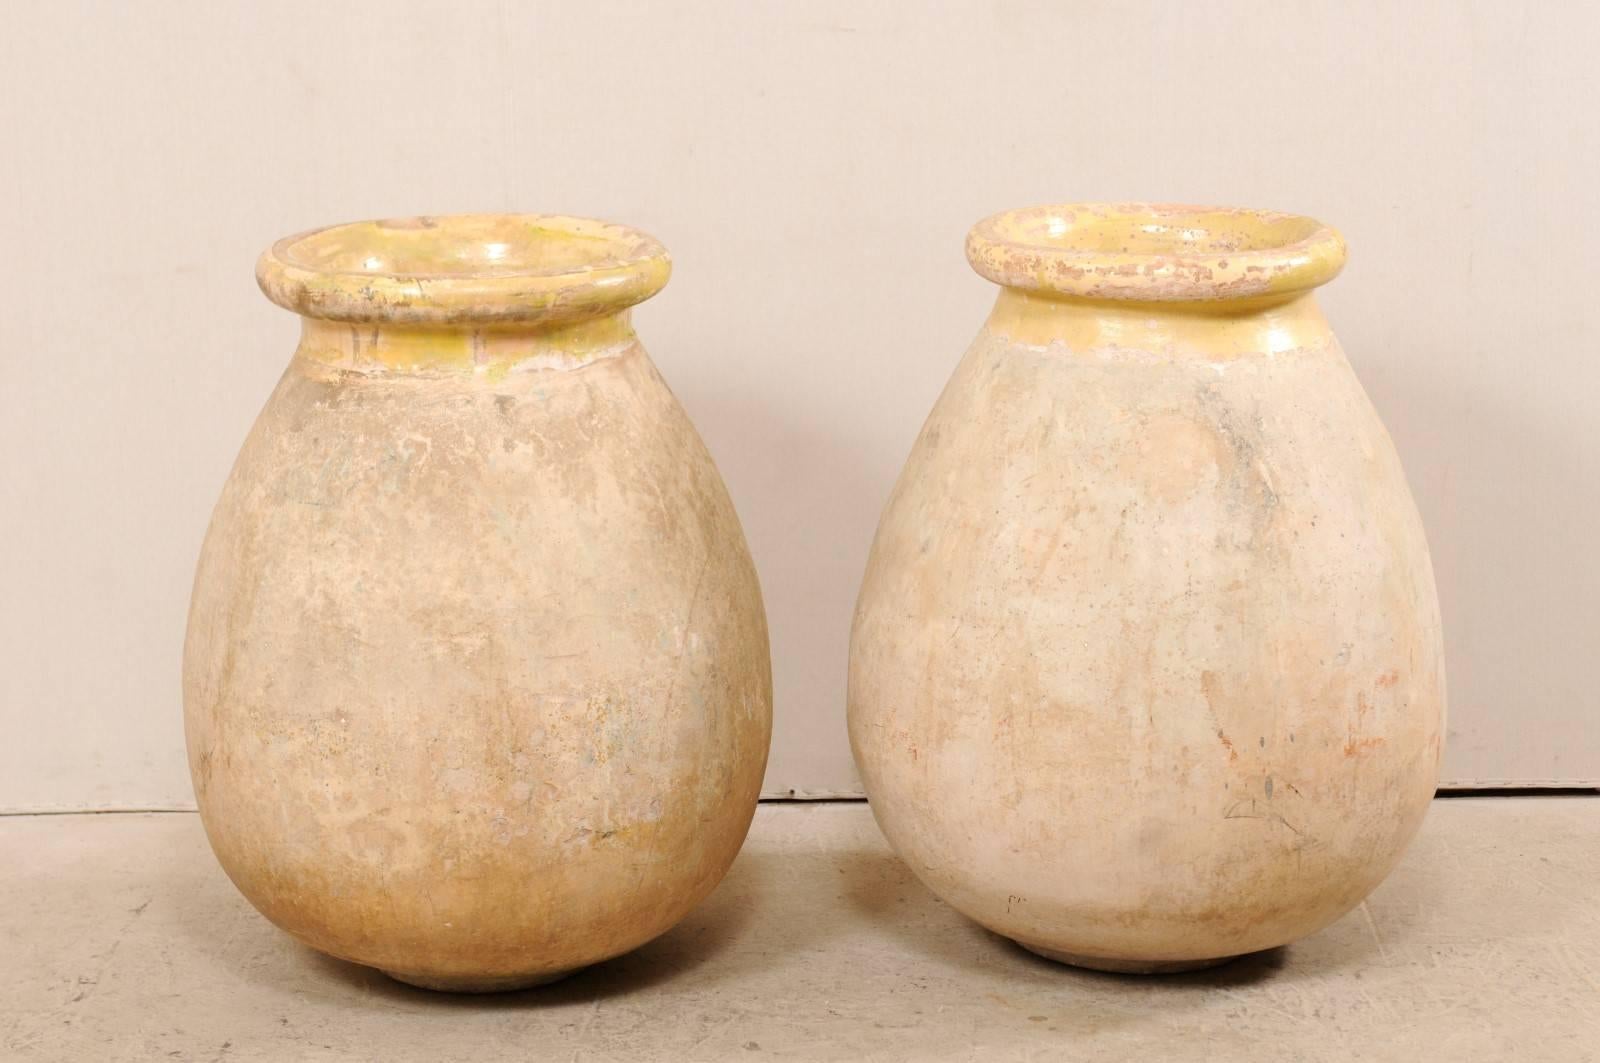 A pair of French 19th century Biot jars. This pair of antique French olive jars from Biot, France (a small potting village in the south of France) are made from terracotta with much of the original pale yellow glaze remaining about their neck and